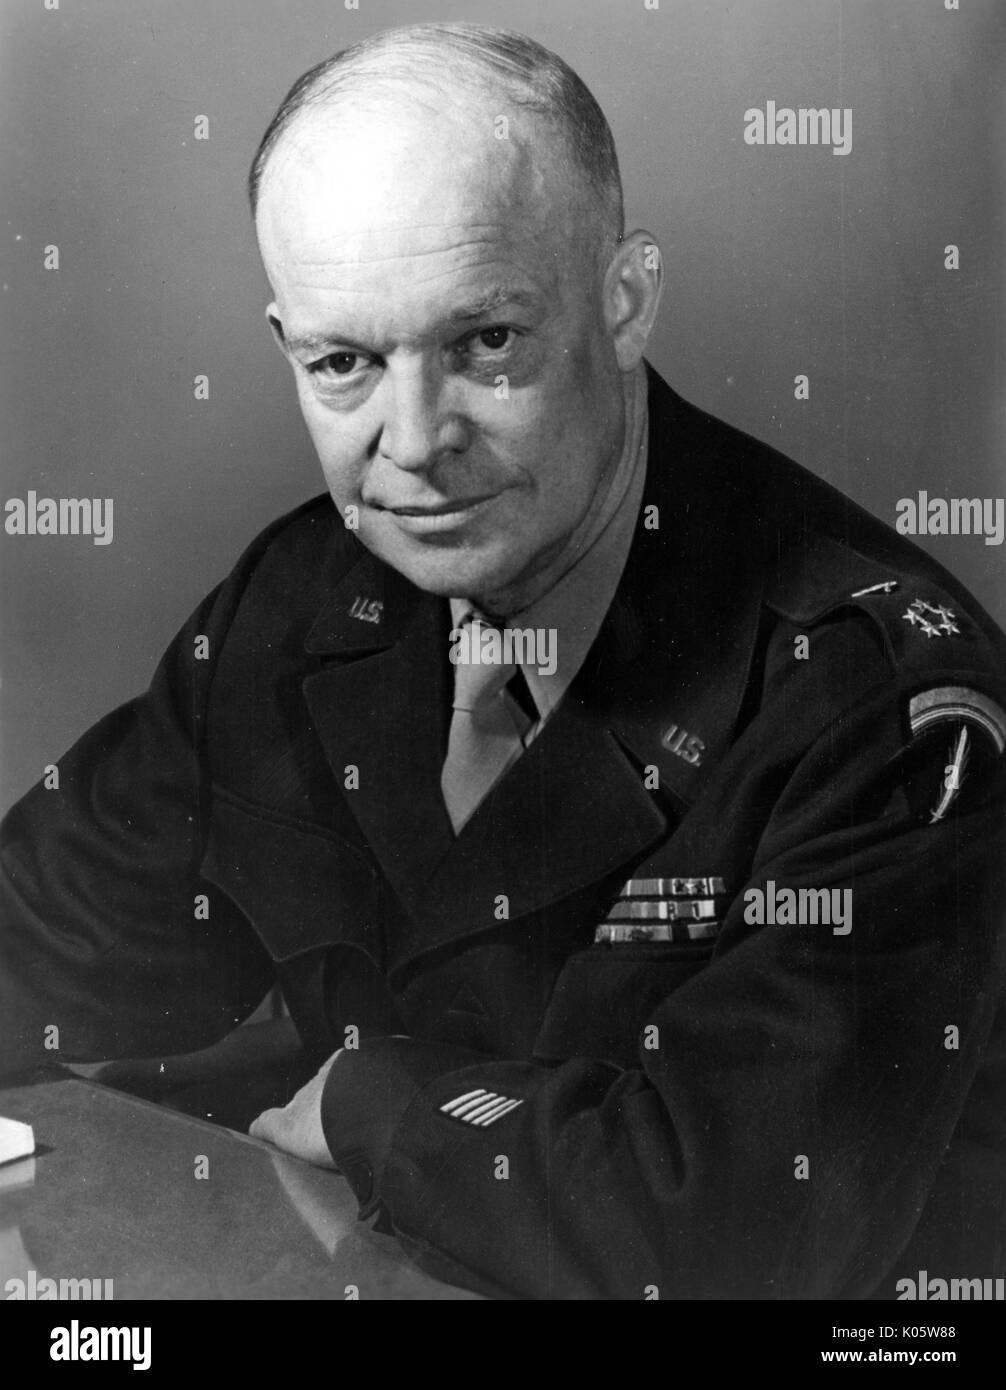 Half-length portrait of Dwight Eisenhower, seated with arms leaning on a table, with a serious facial expression, wearing black military shirt, 1945. Stock Photo